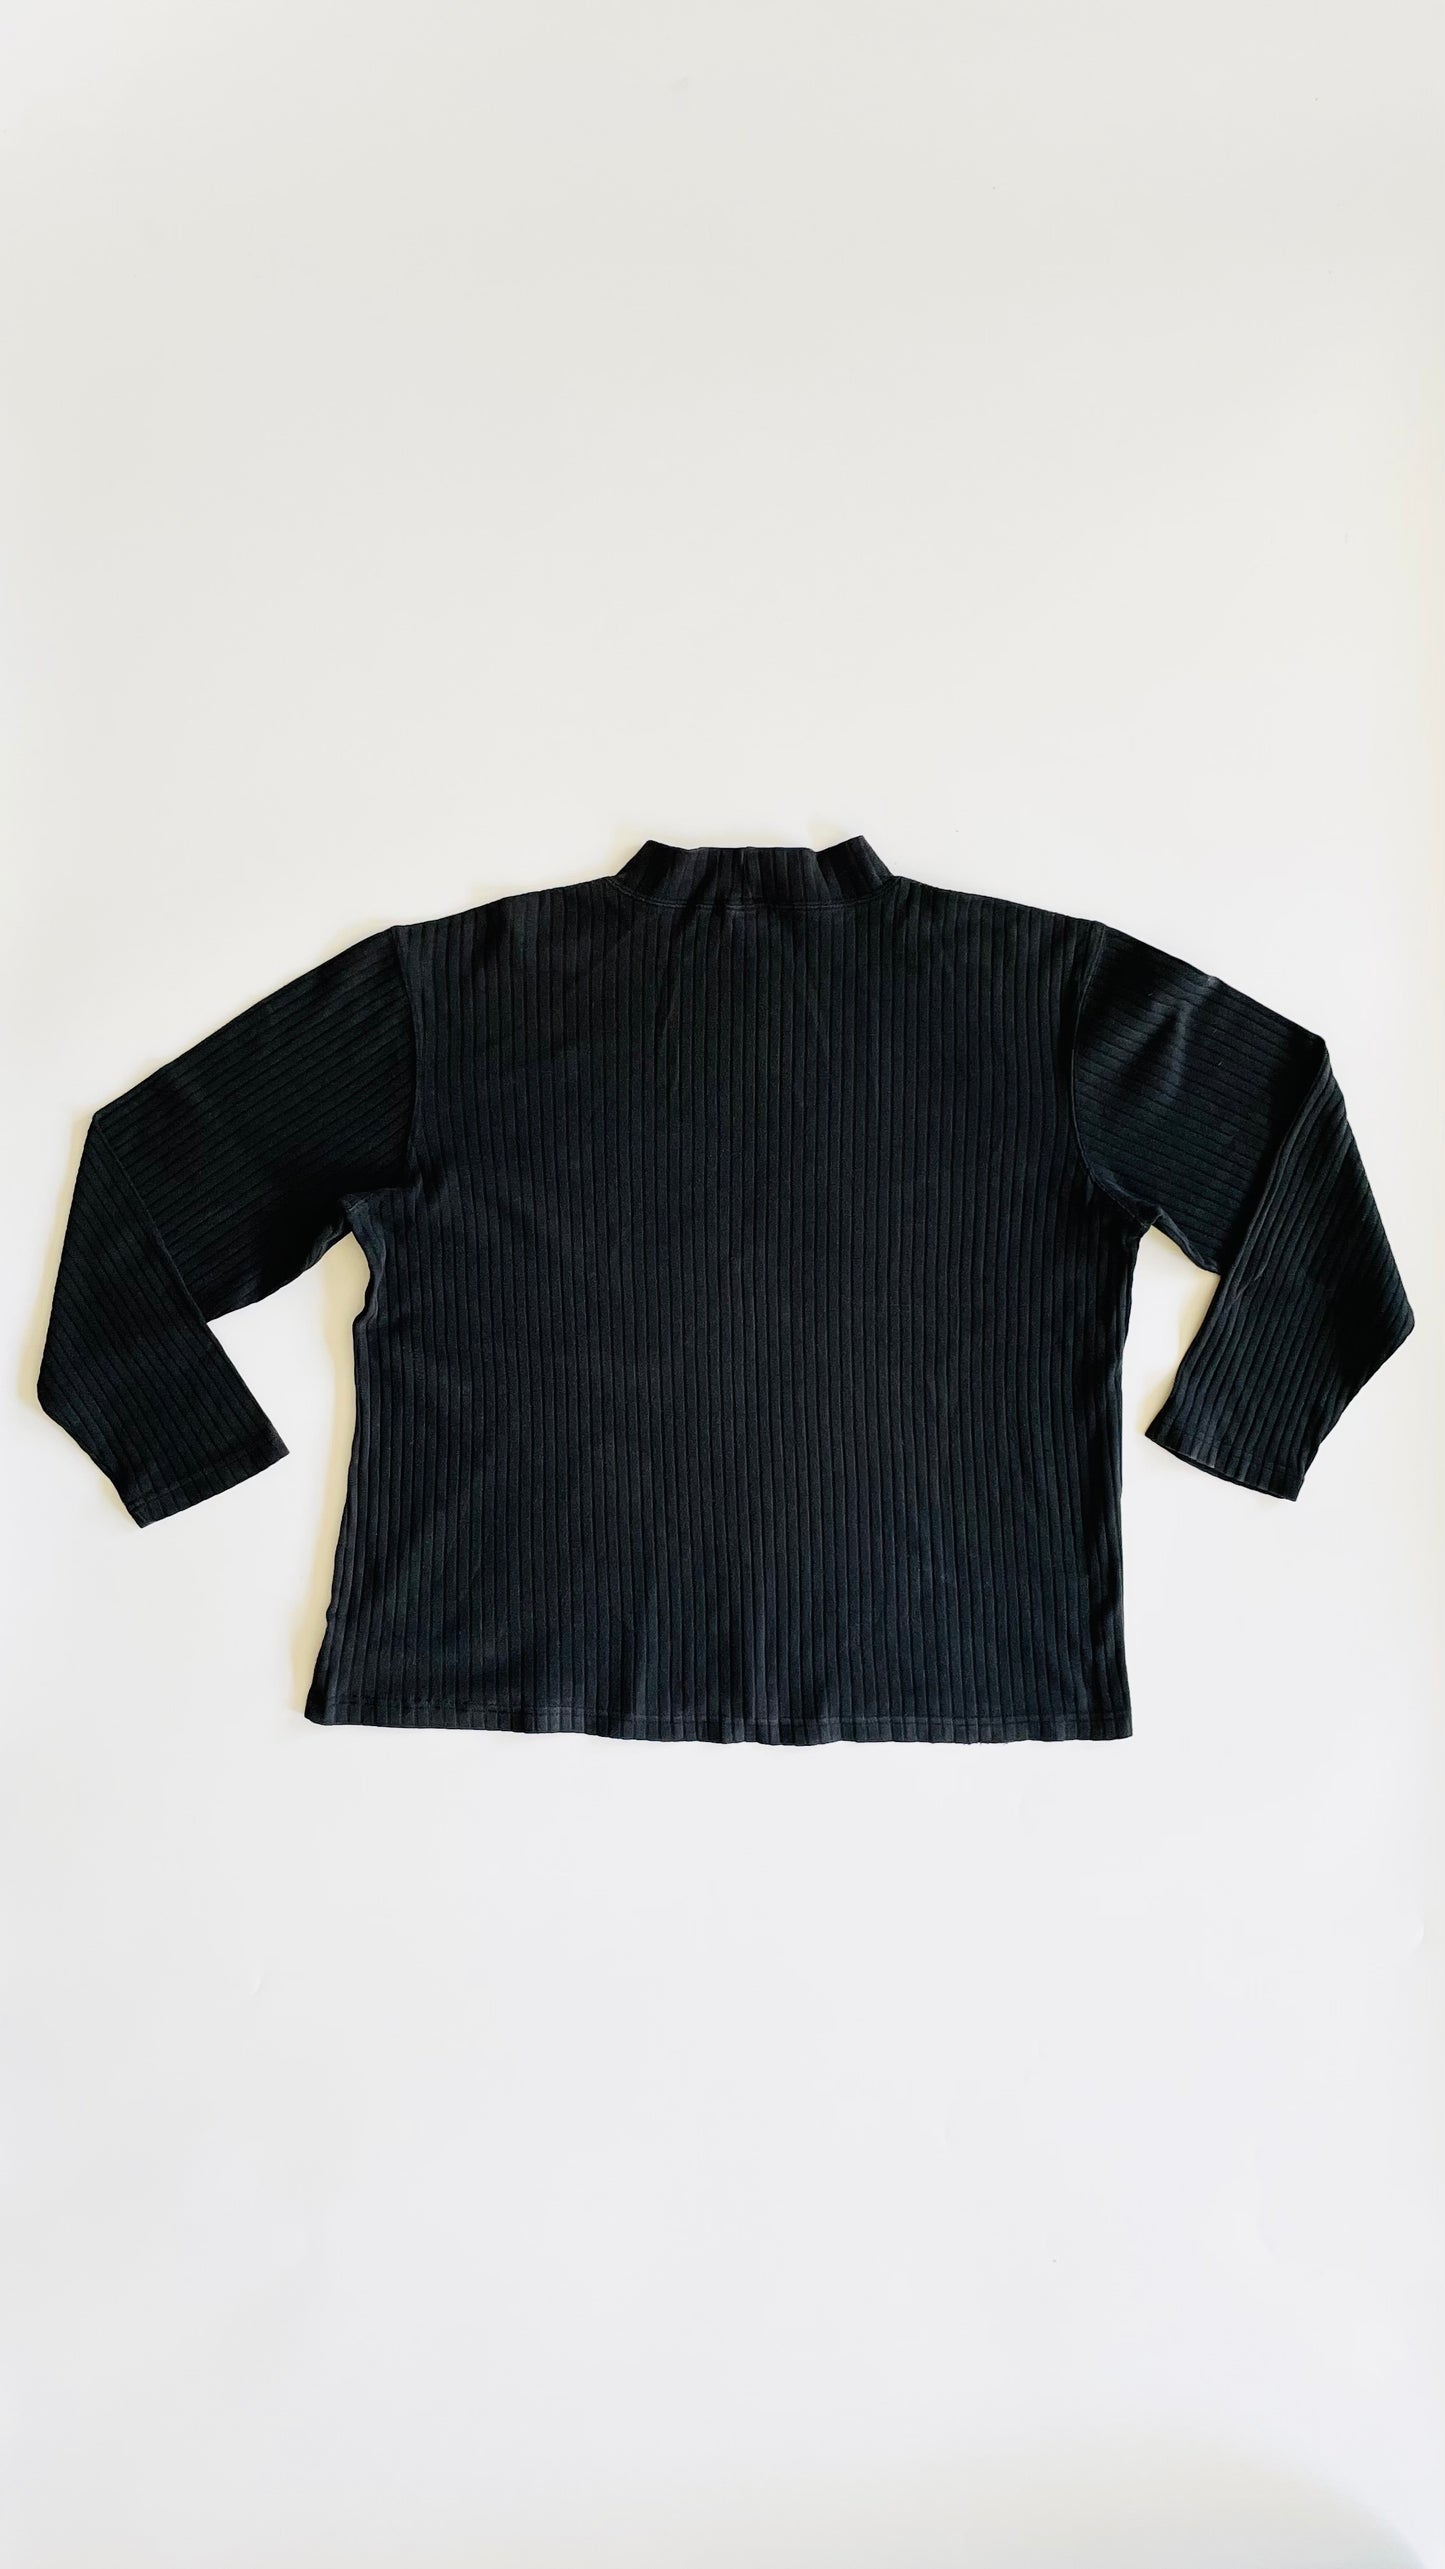 Vintage 90s faded black ribbed long sleeve shirt - Size L